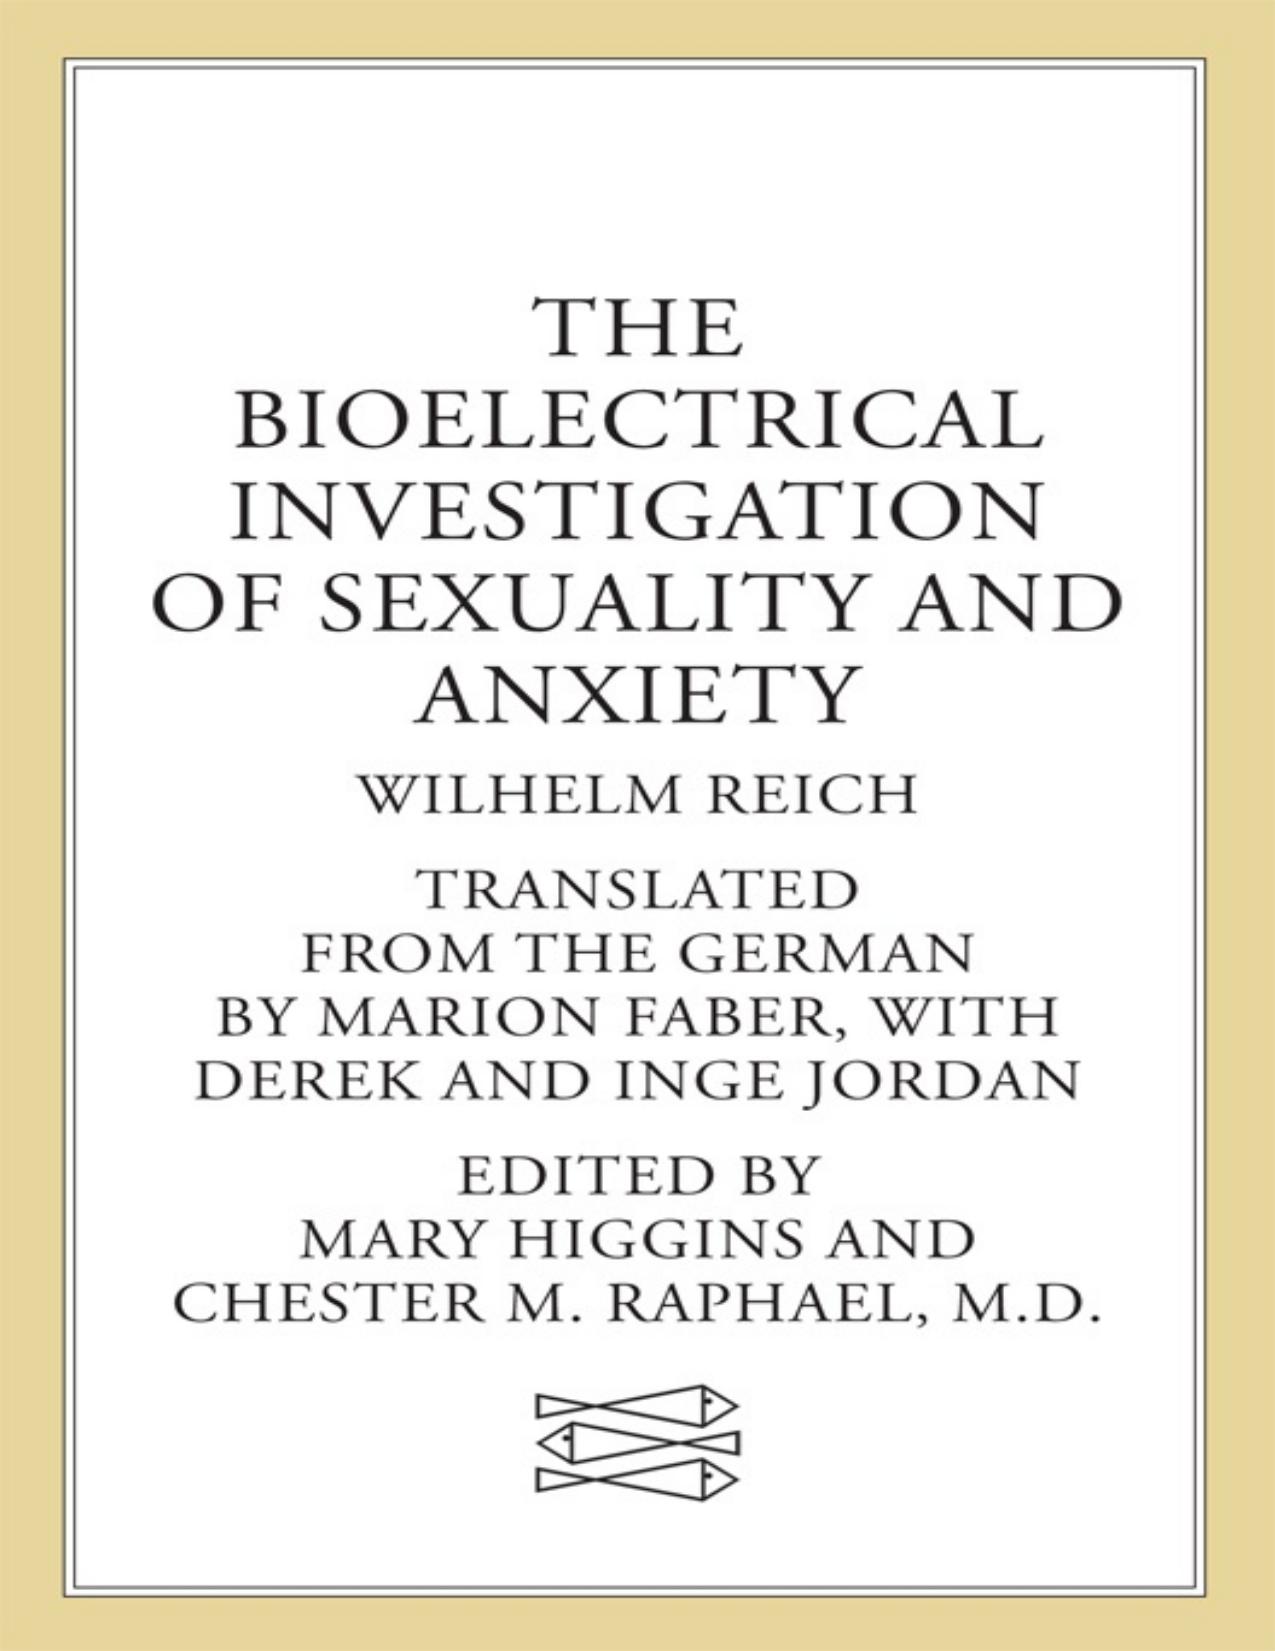 The Bioelectrical Investigation of Sexuality and Anxiety by Wilhelm Reich